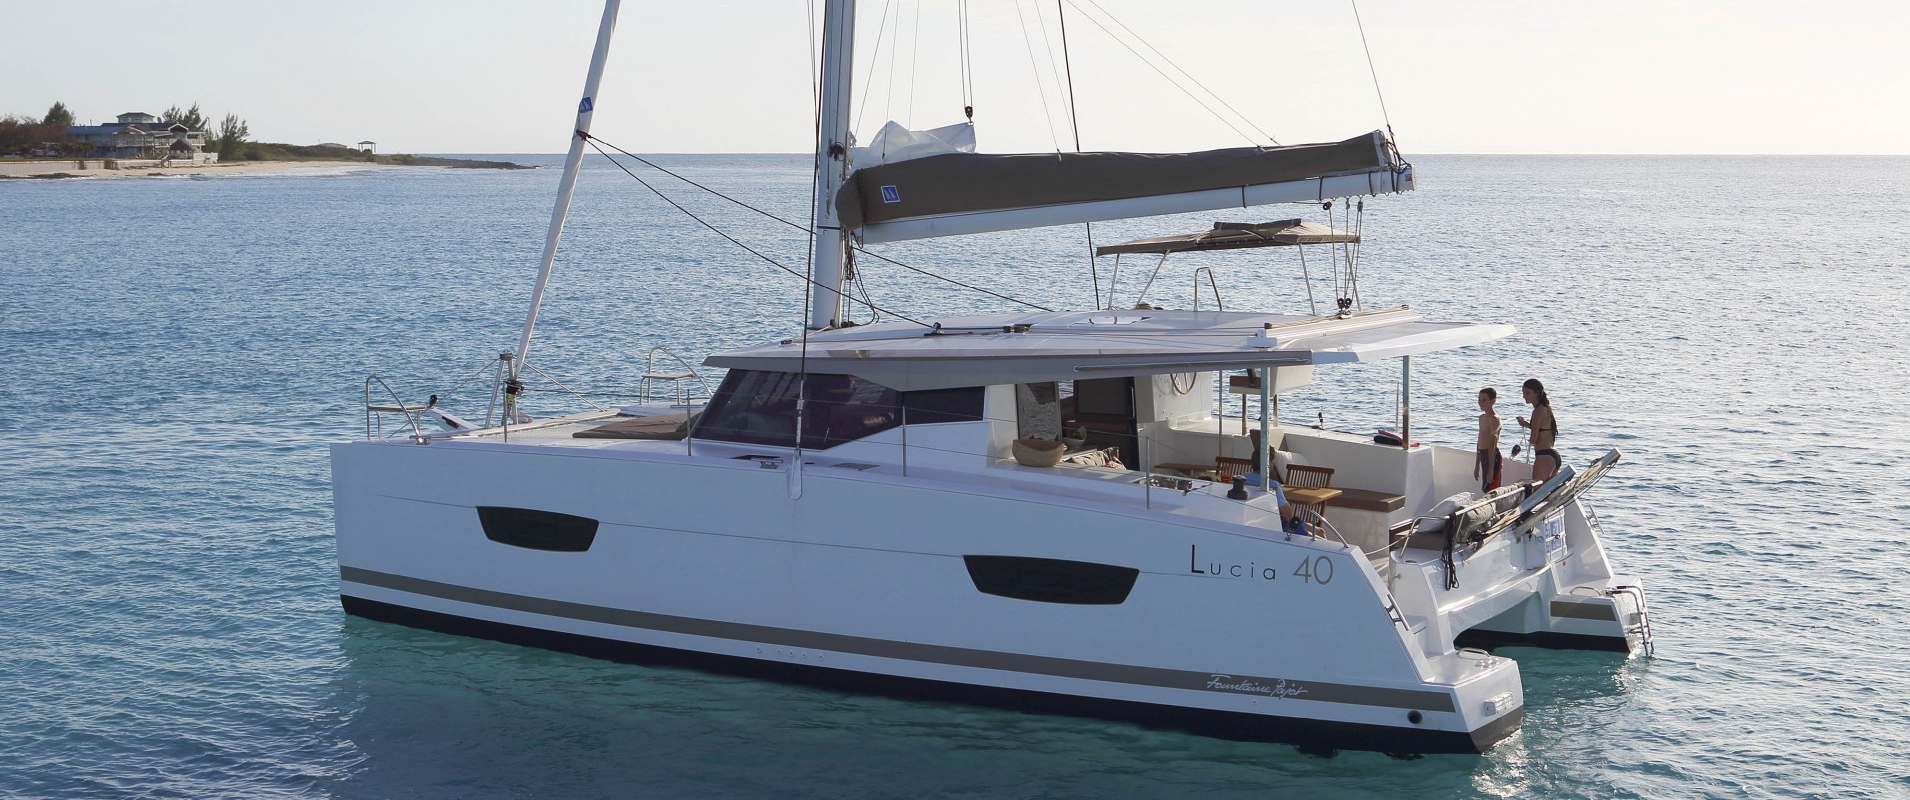 Fountaine Pajot Lucia 40 CLASS Bareboat Charter in France